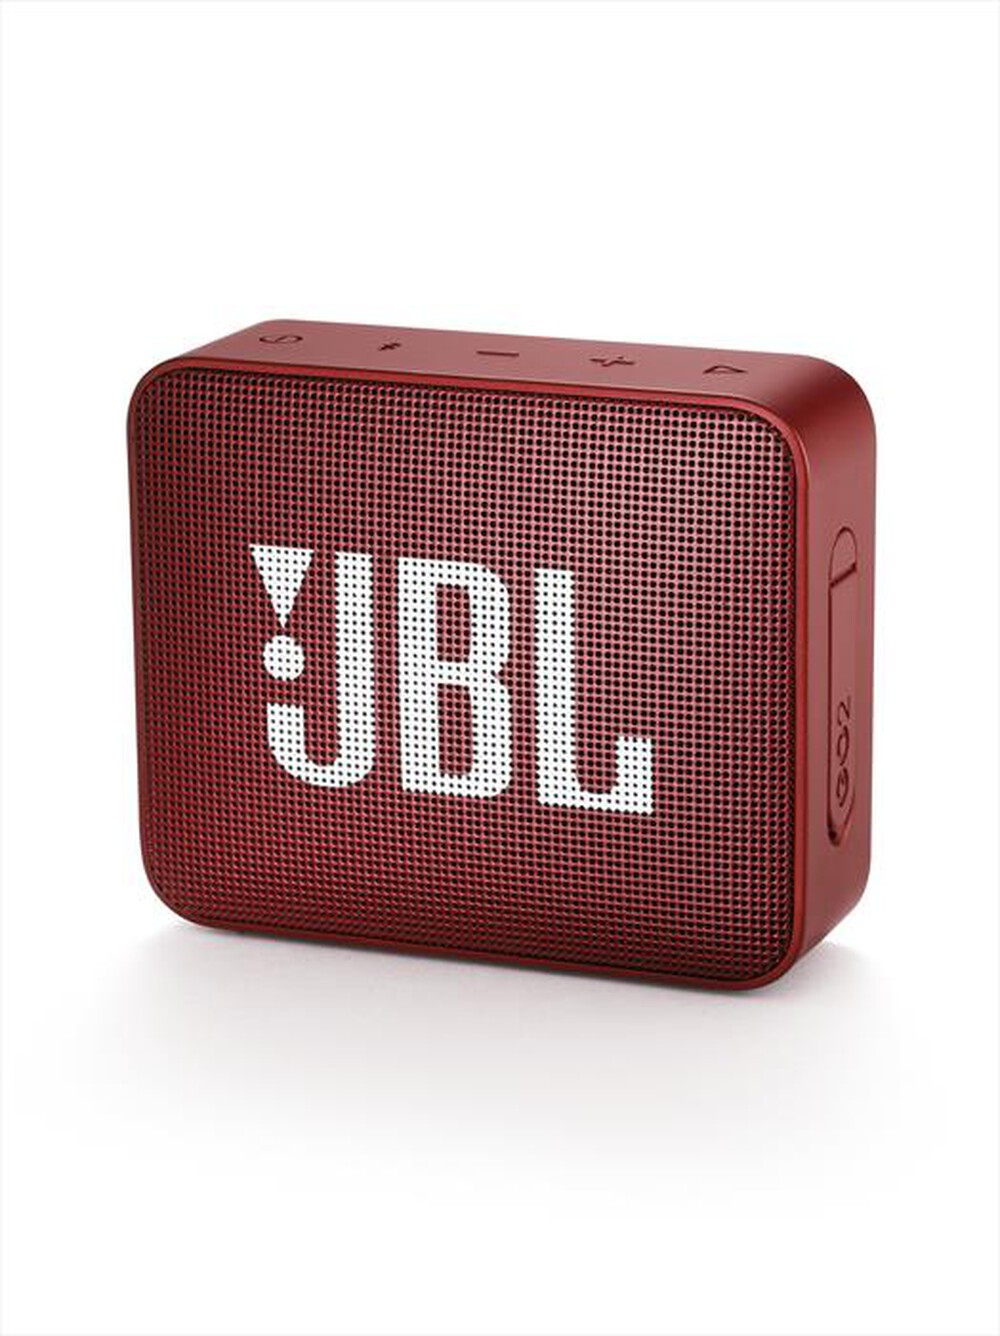 "JBL - GO 2-Rosso"